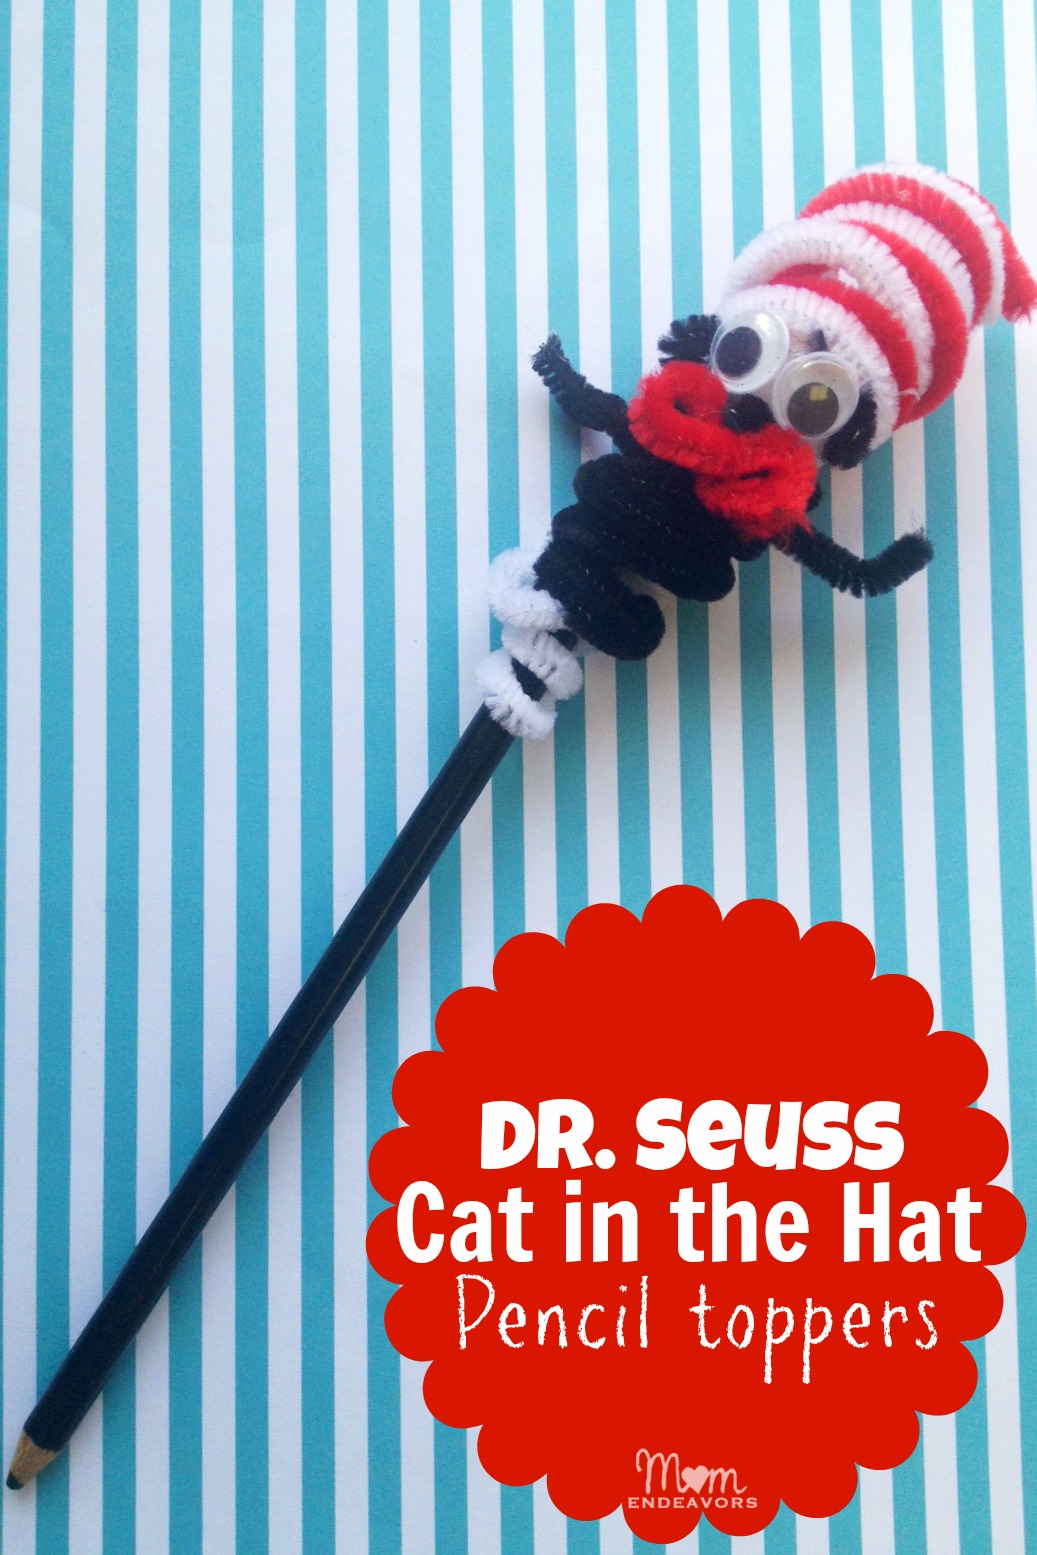 Dr. Seuss Cat in the Hat Pencil Toppers